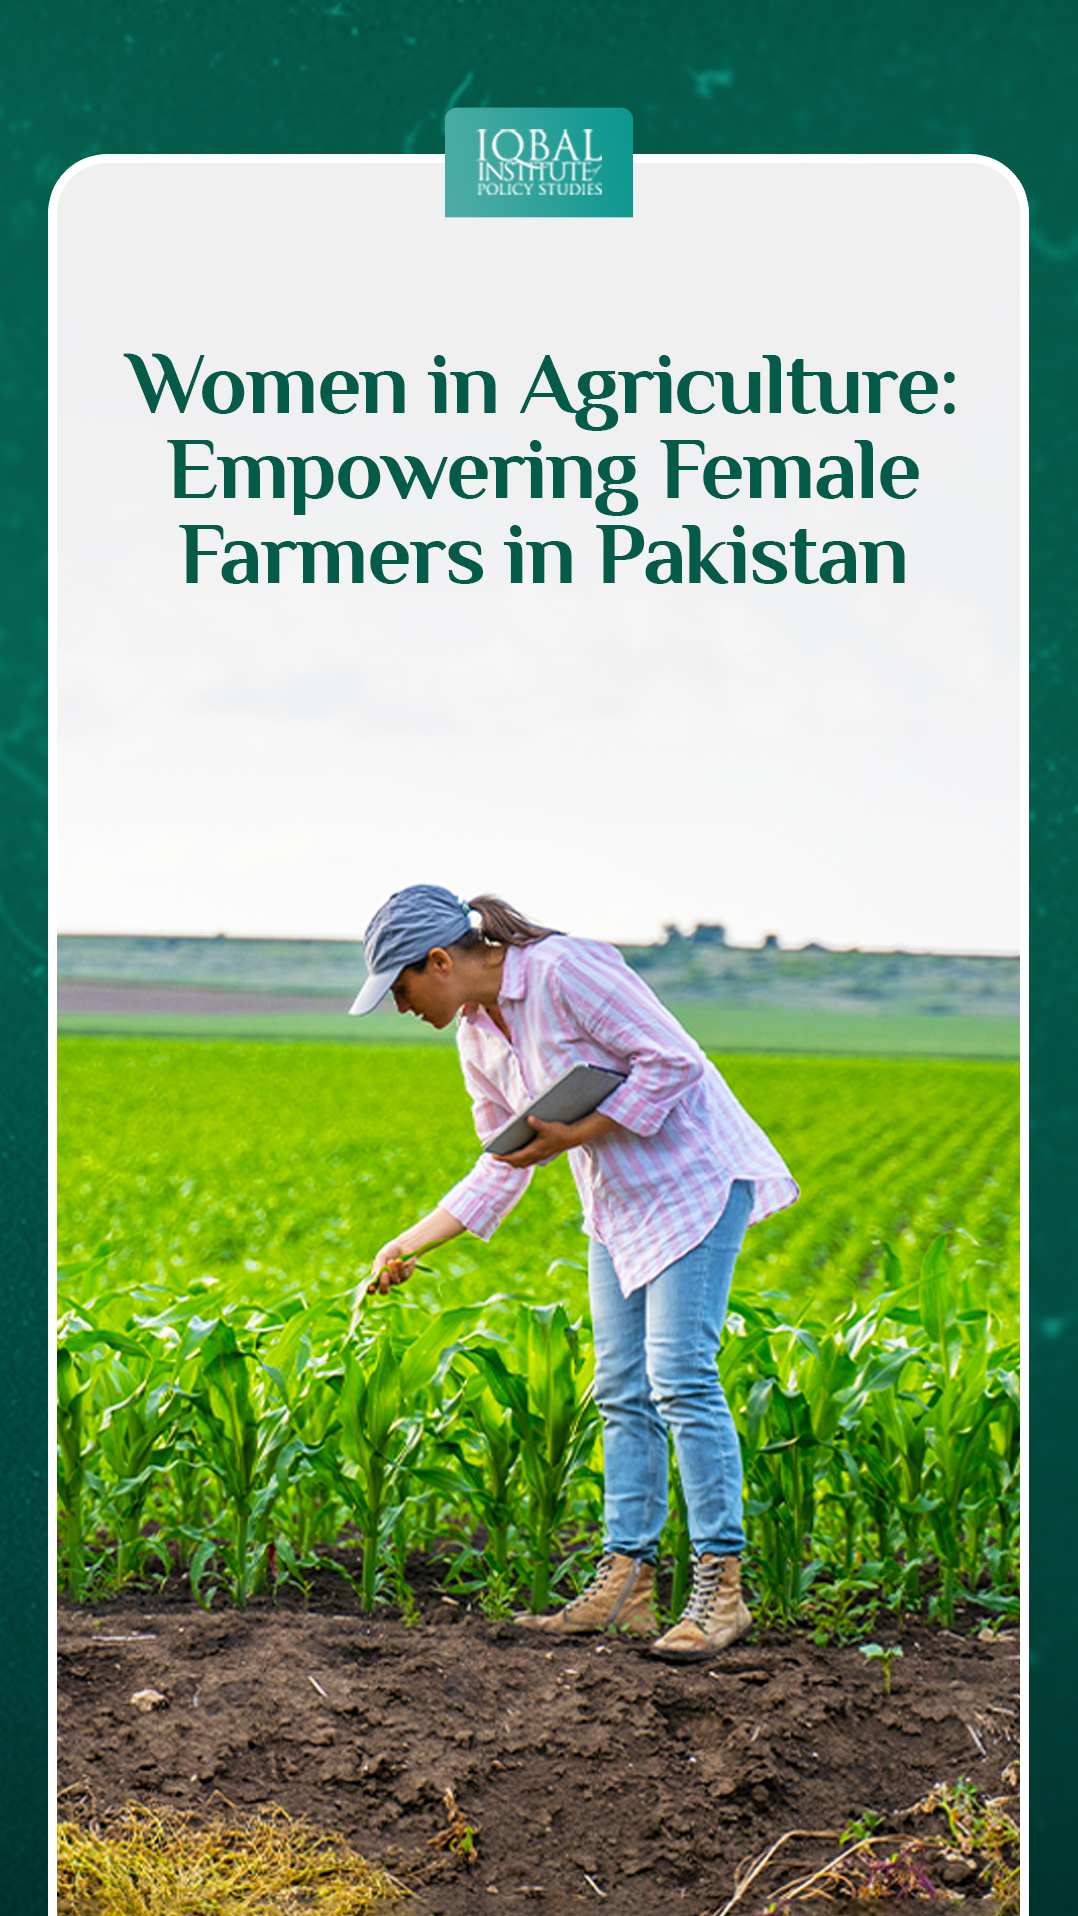 Women in Agriculture: Empowering Female Farmers in Pakistan